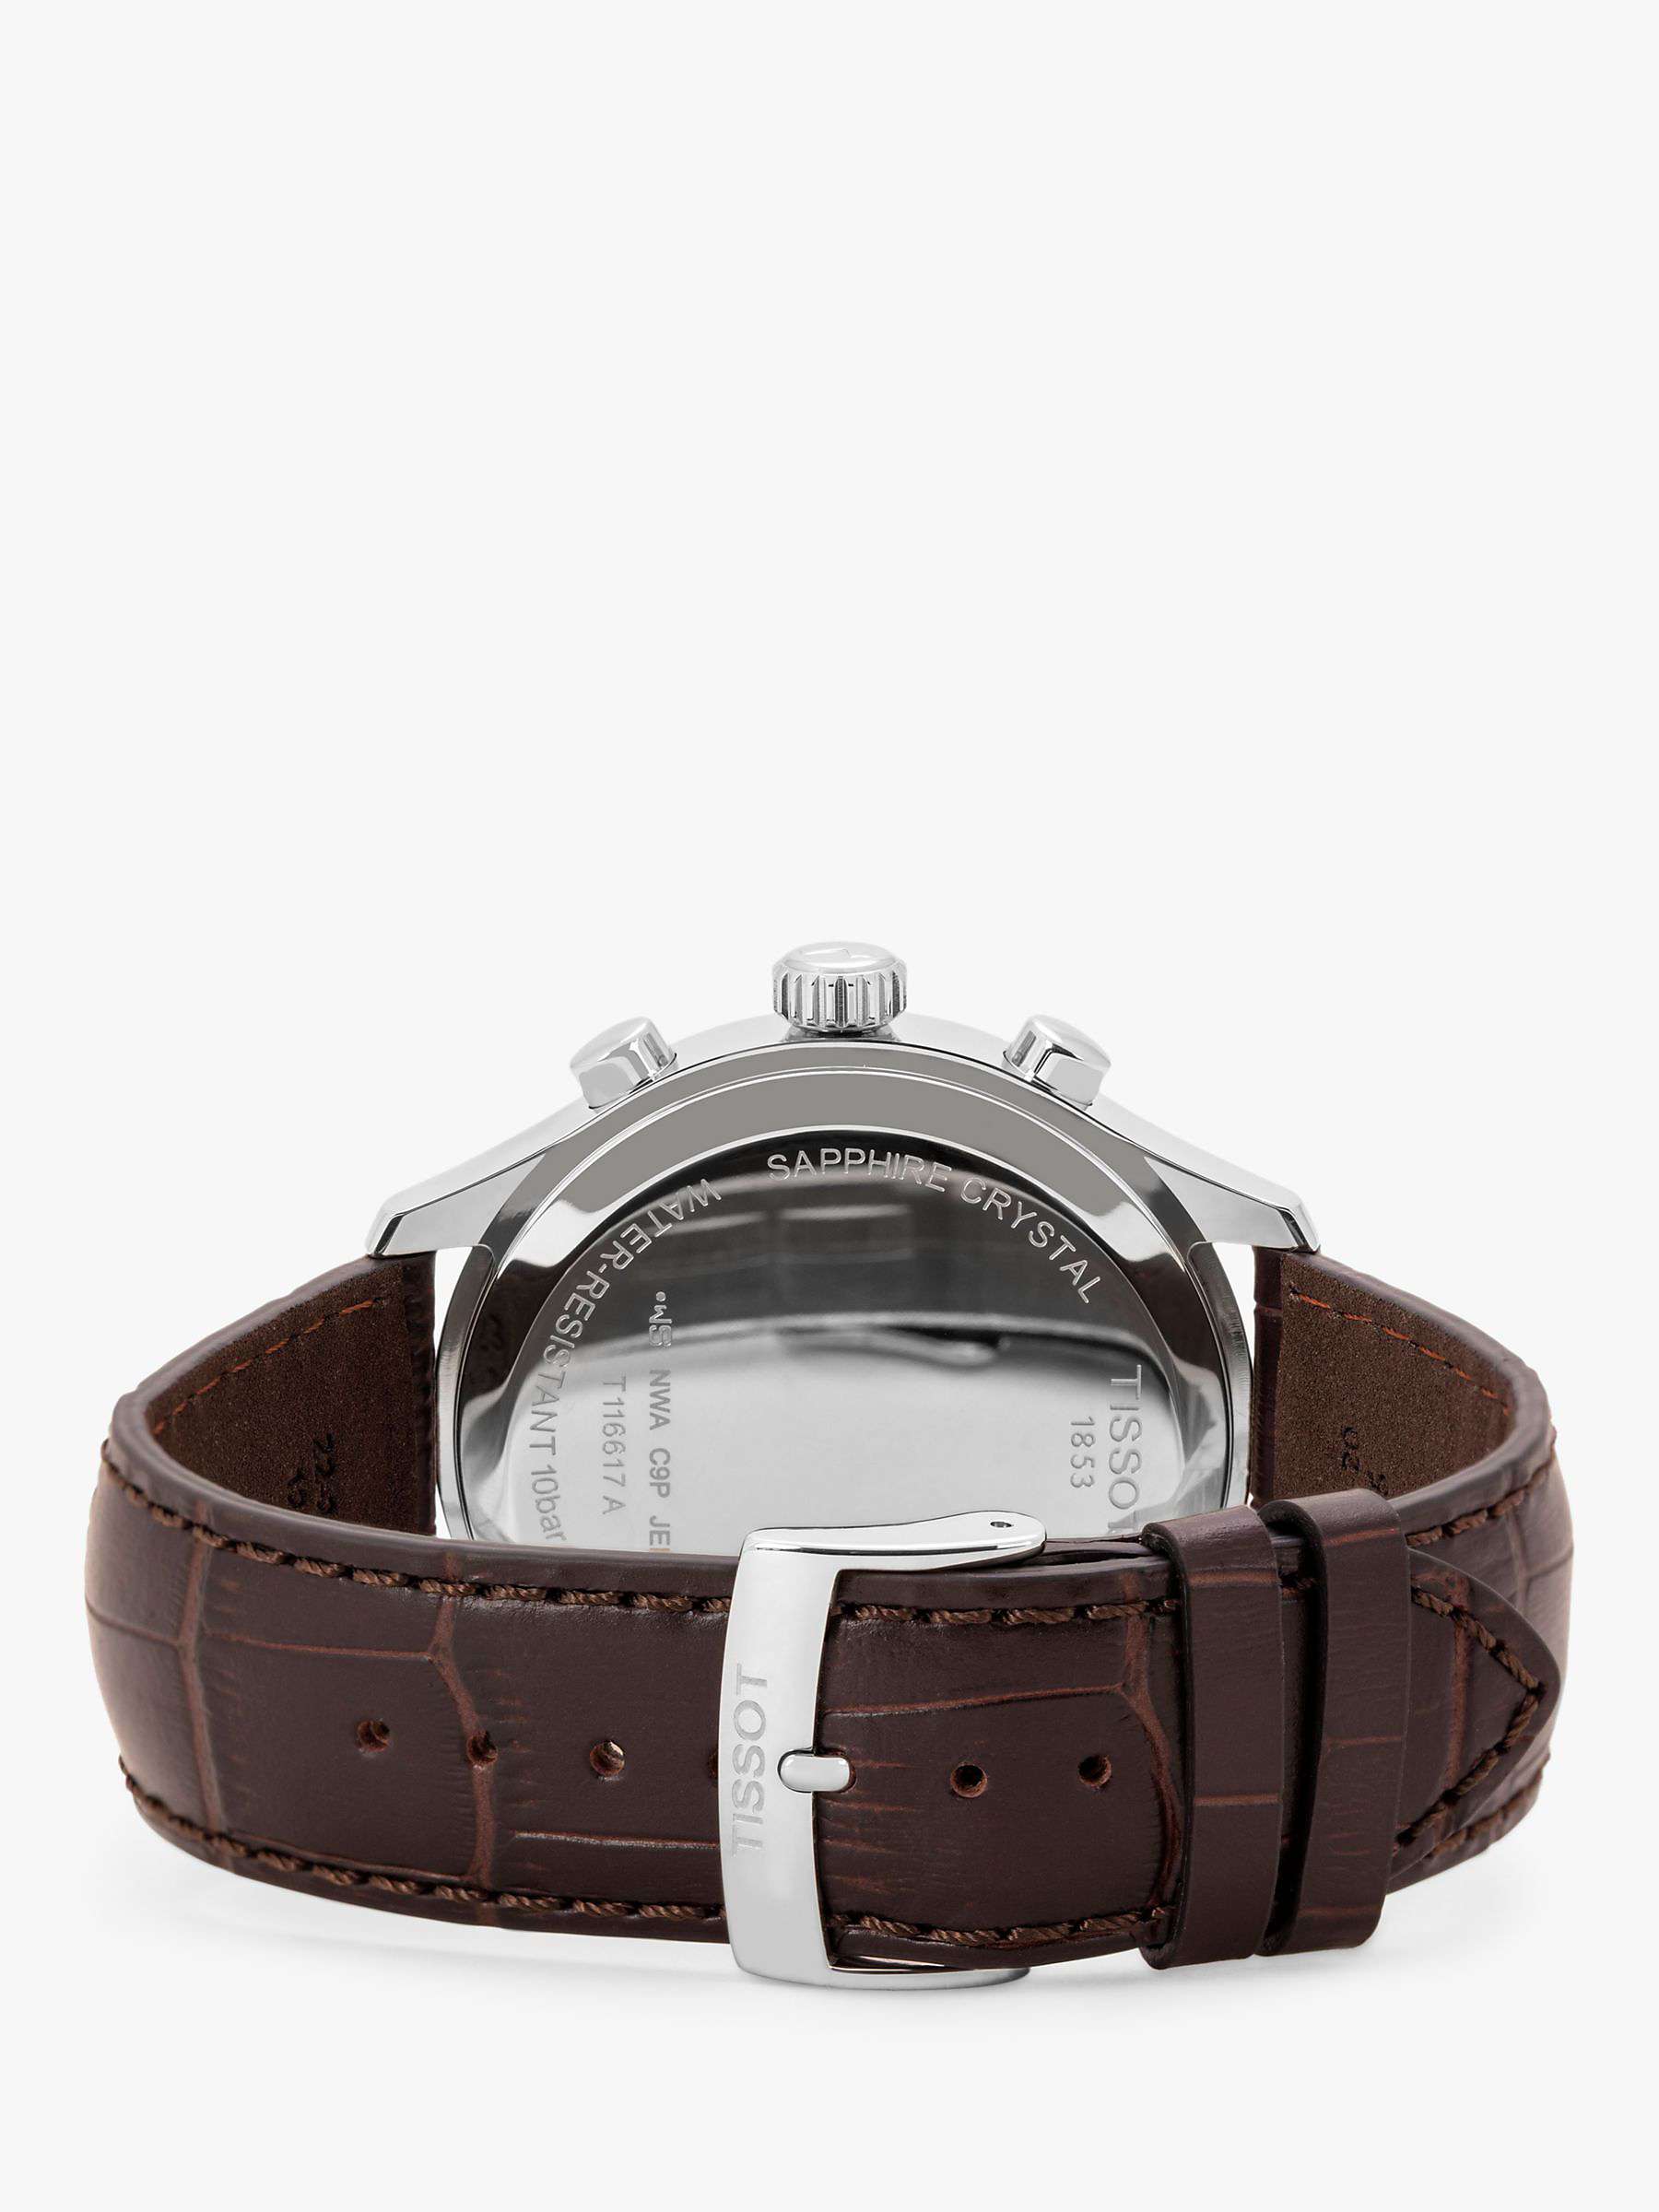 Buy Tissot T1166171604700 Men's Classic Chronograph Date Leather Strap Watch, Brown/Blue Online at johnlewis.com